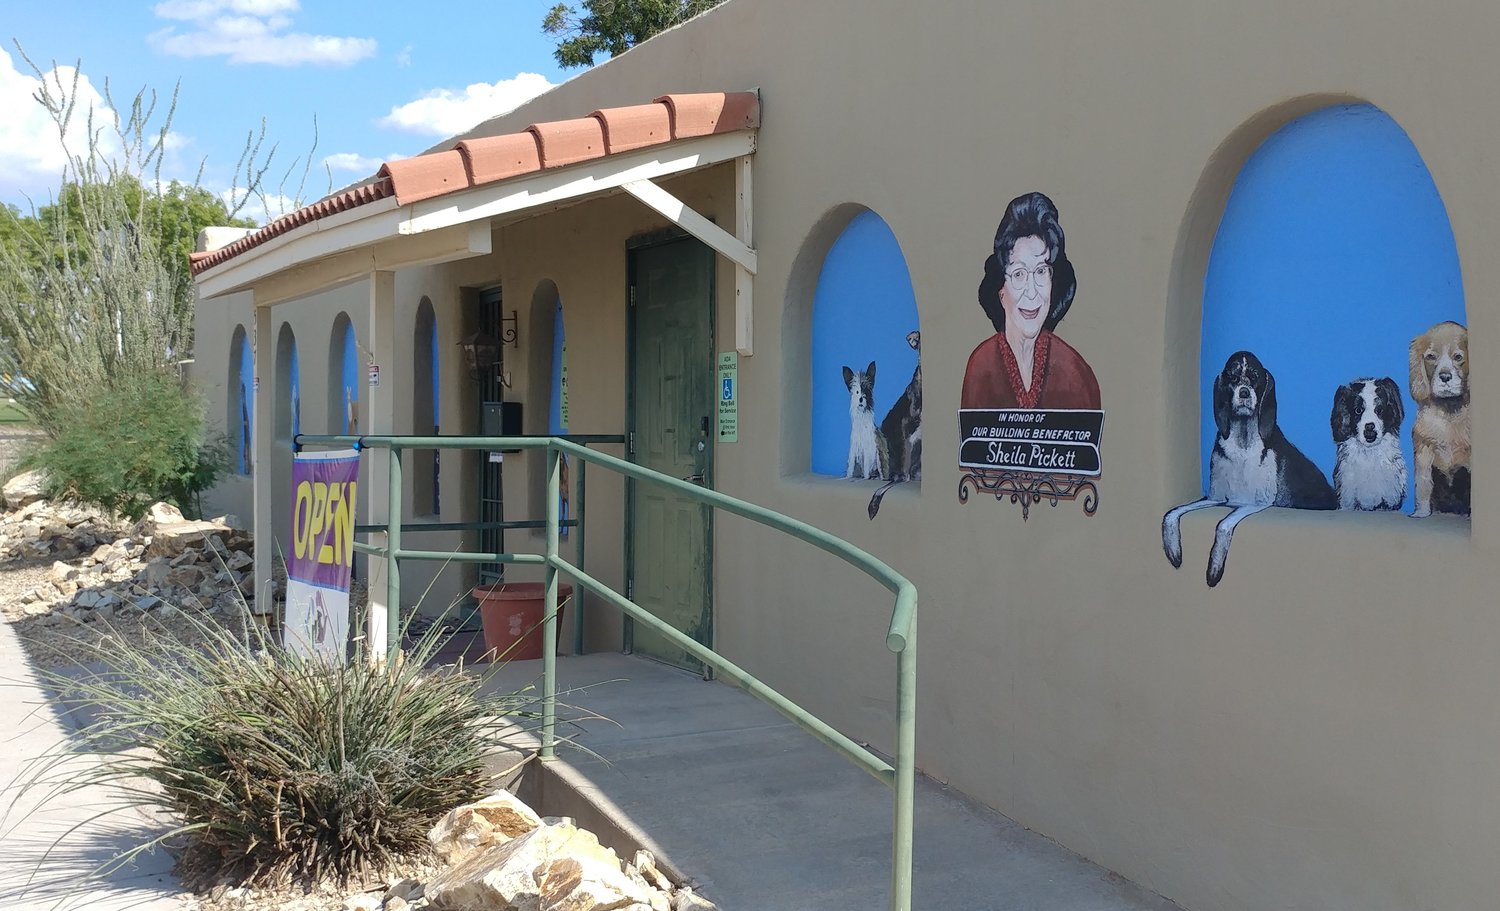 ACTion Programs for Animals new adoption center at 537 N. Solano Drive features a mural honoring its benefactor, Sheila Pickett.